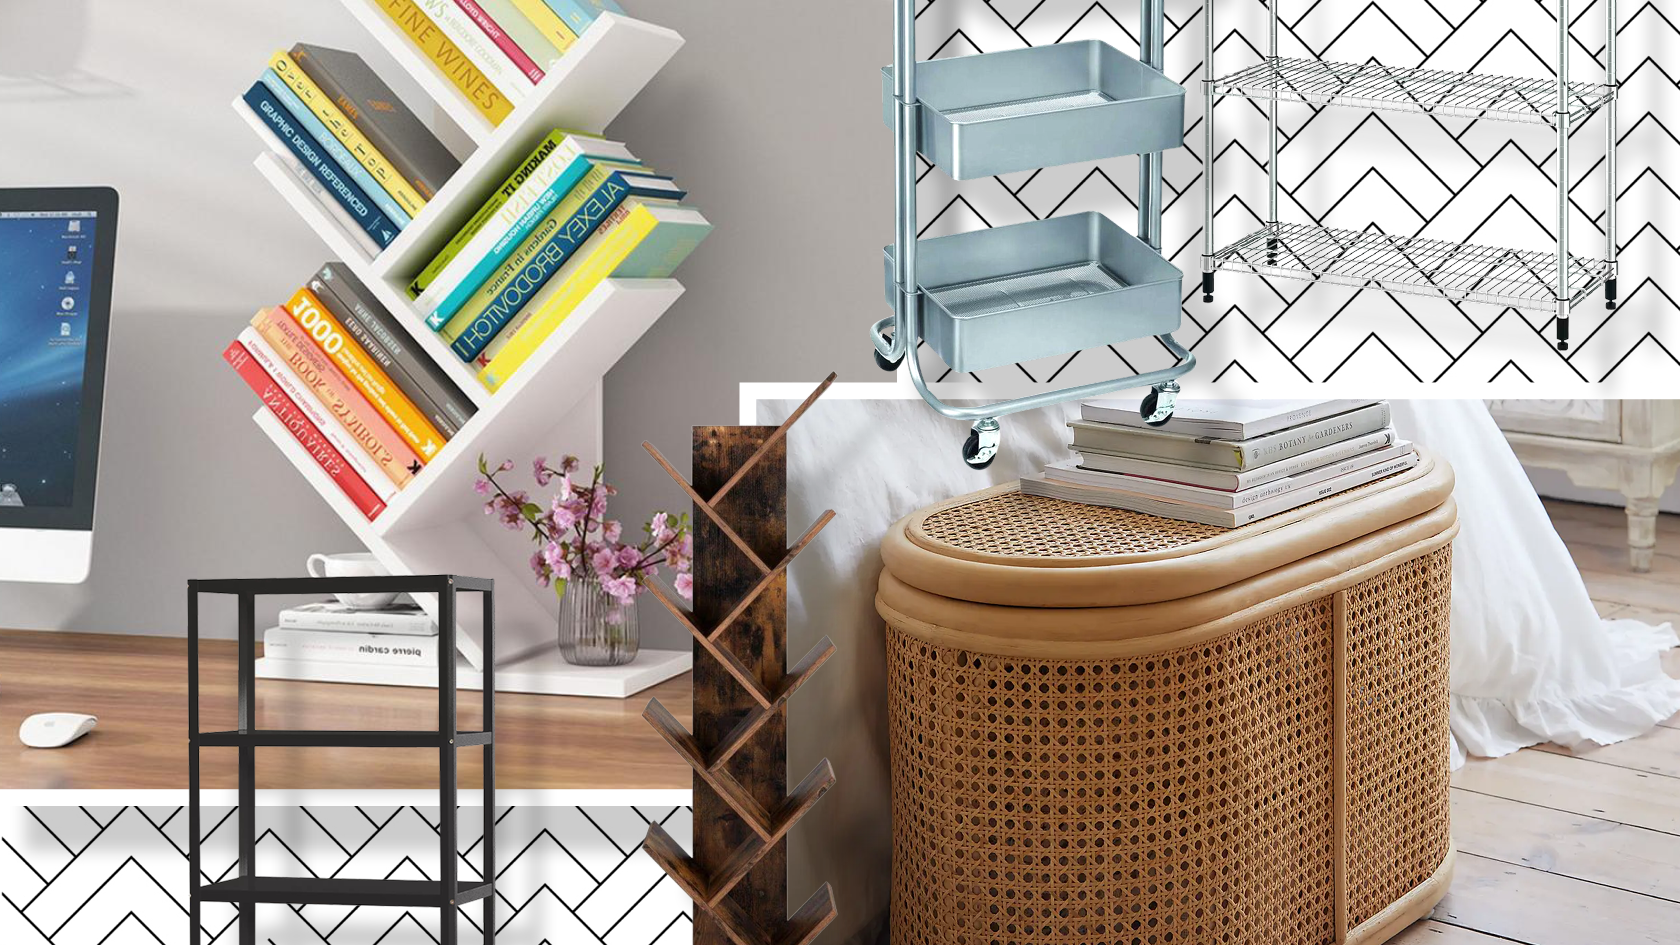 Too many books (and too little space)? 9 storage solutions that are here to help